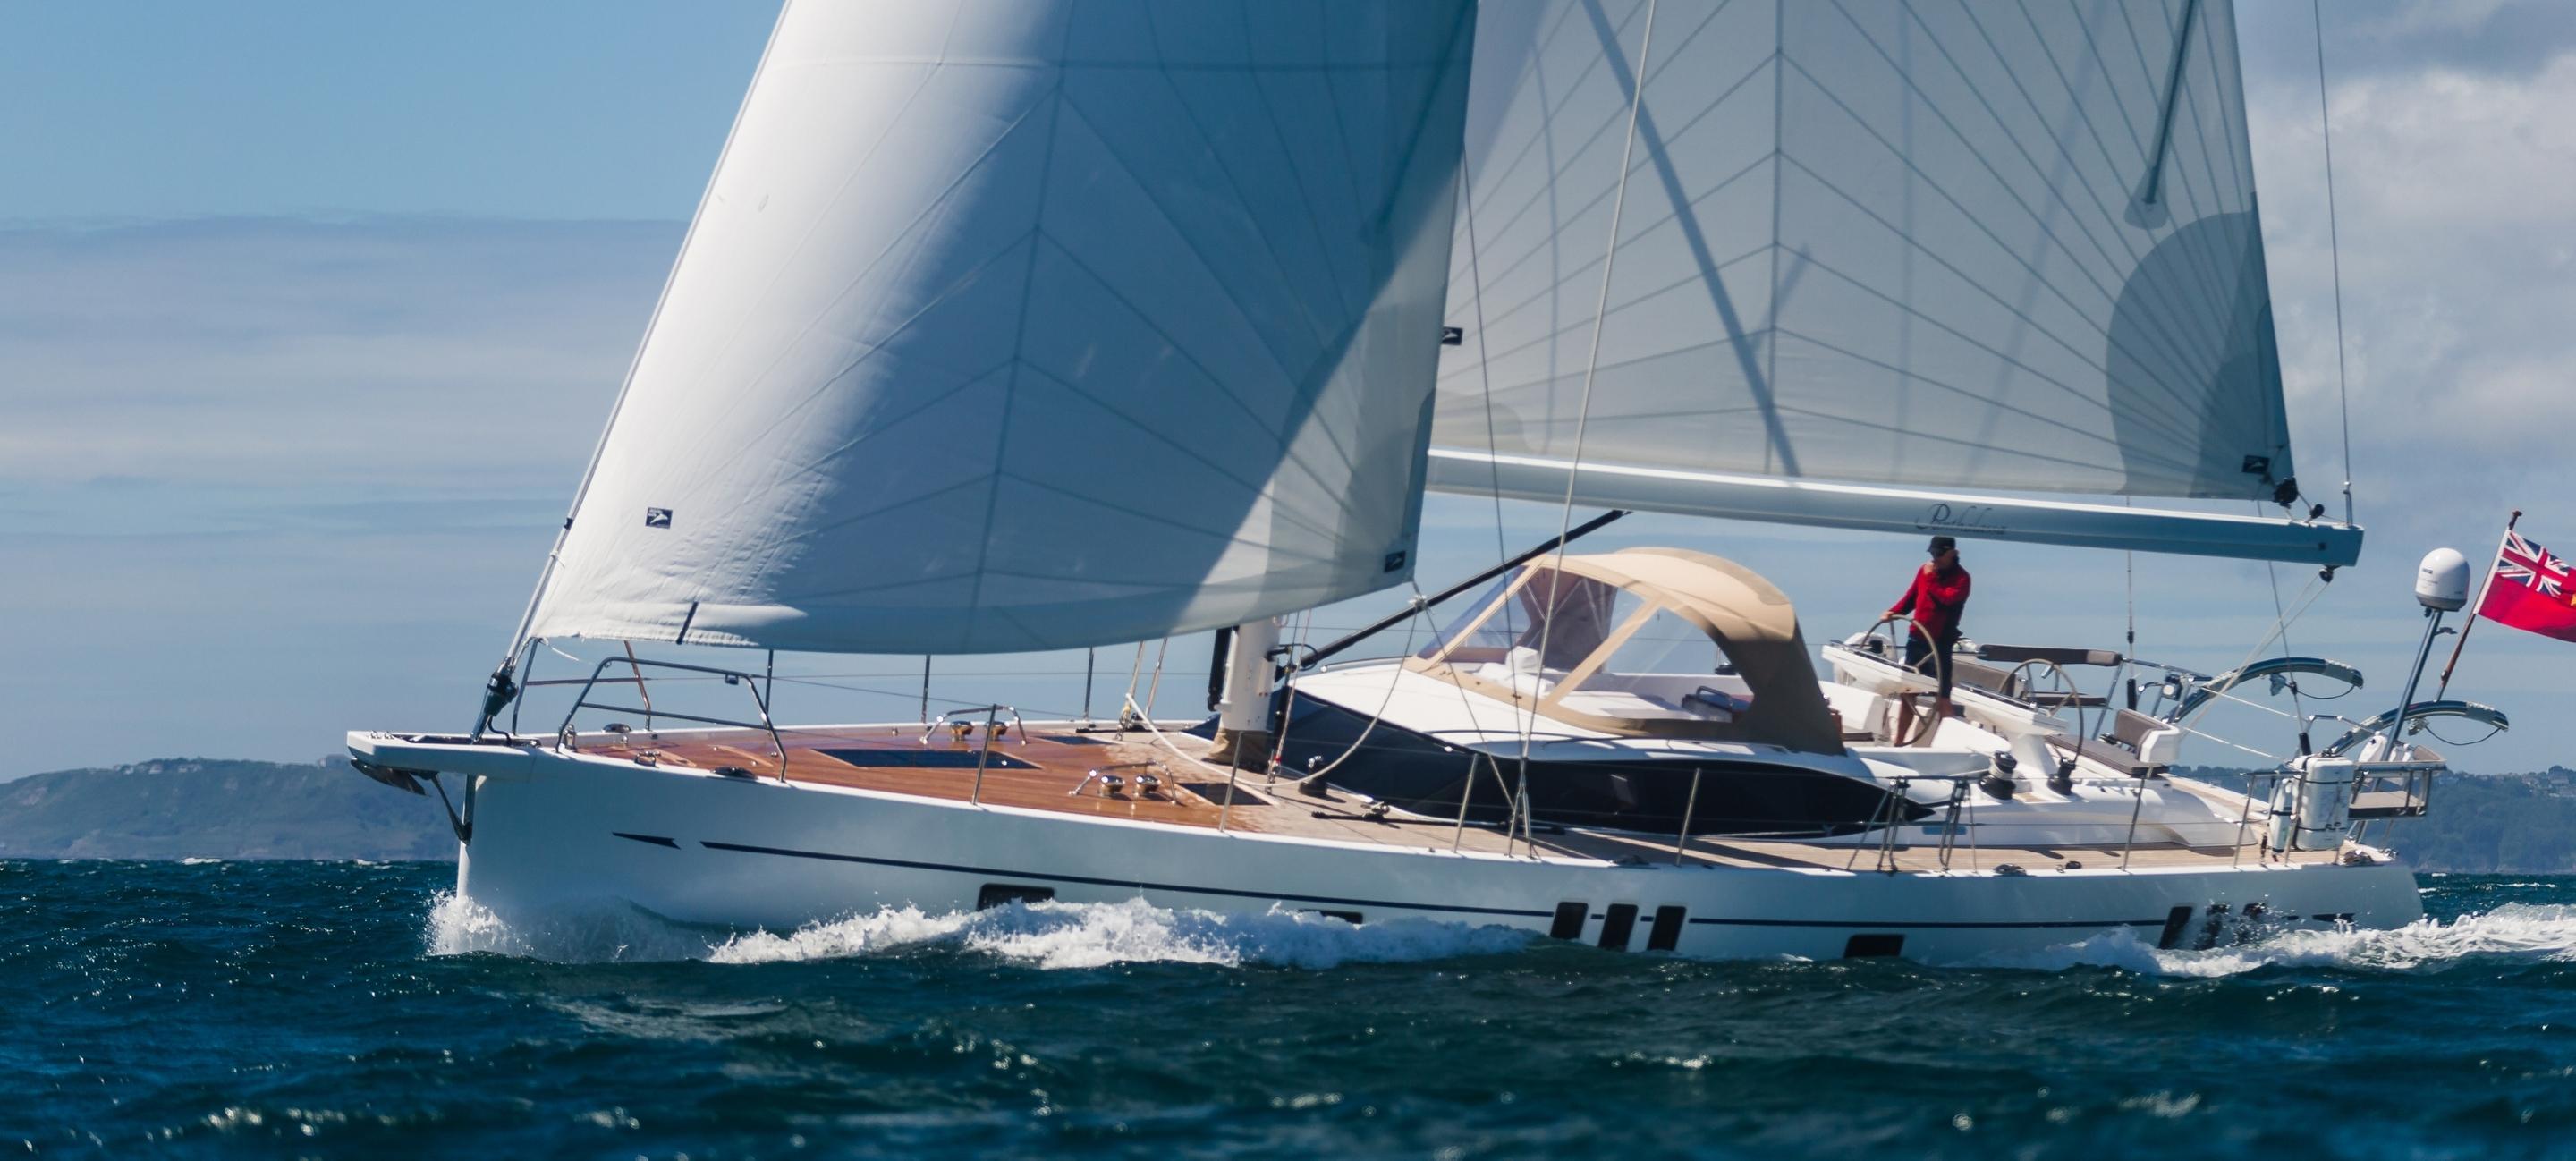 oyster yachts used